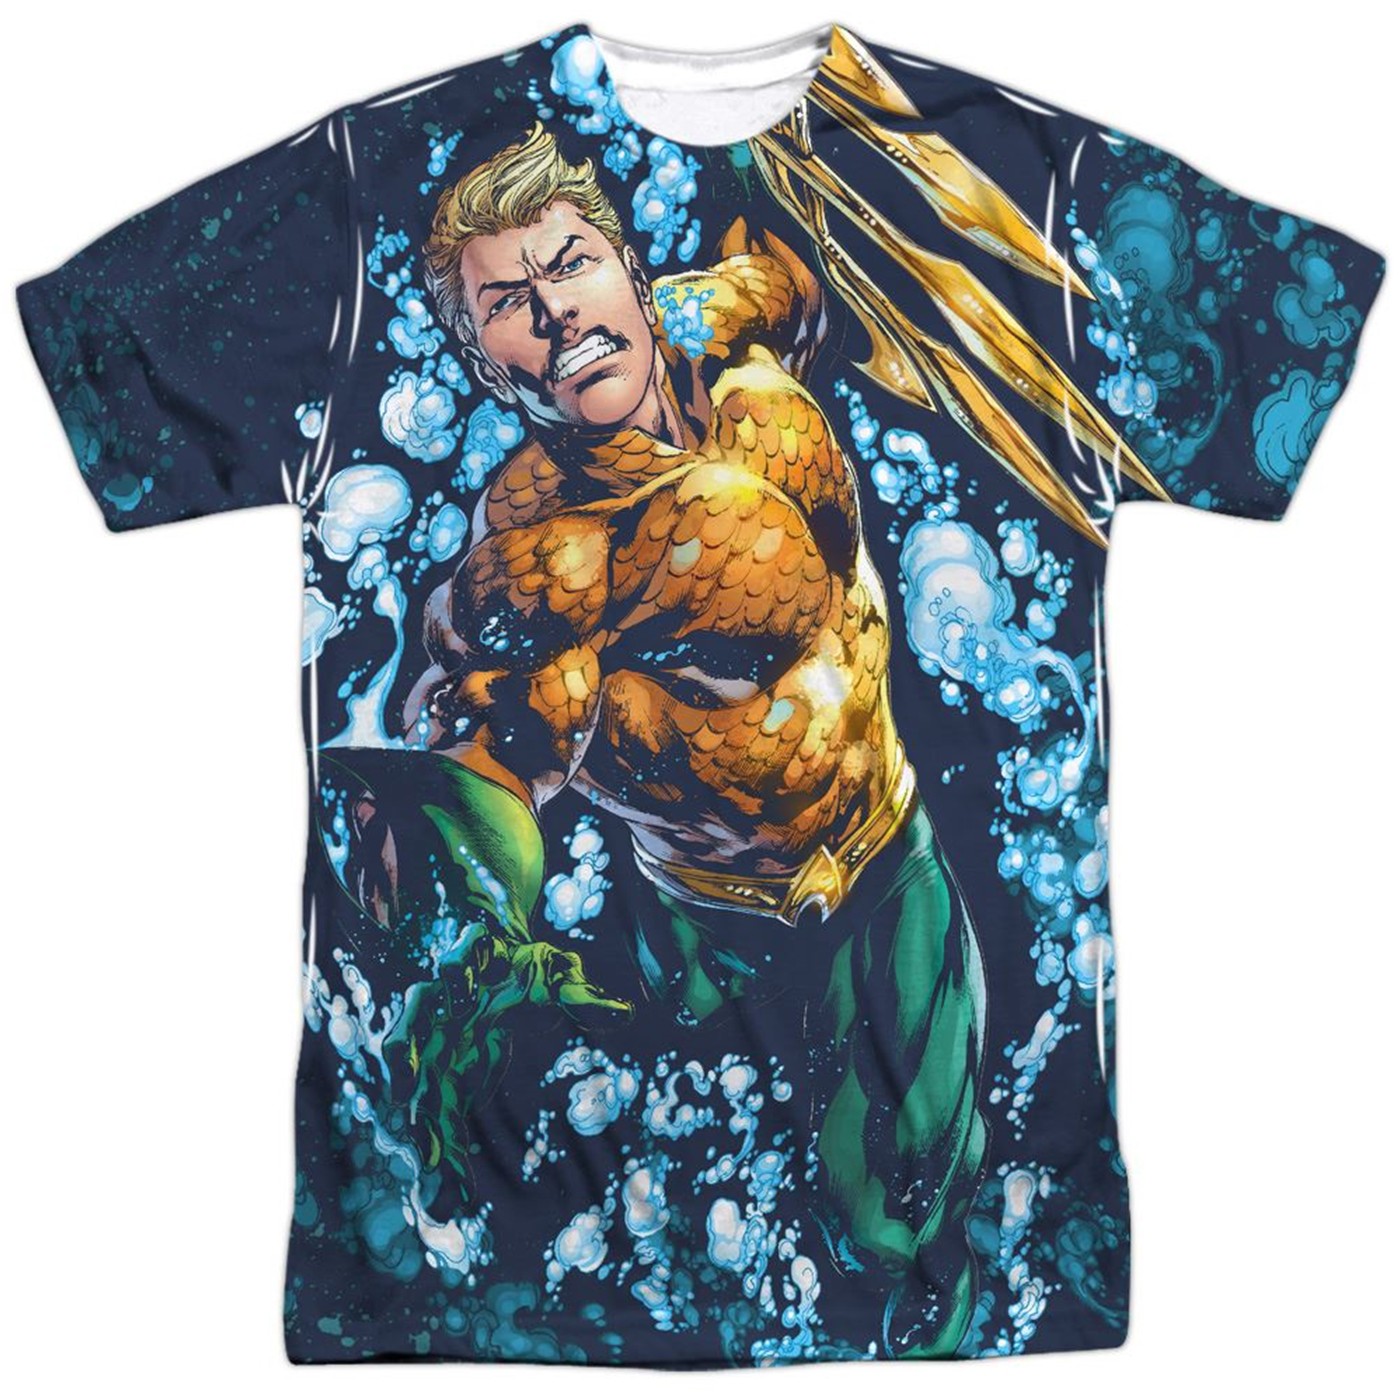 Aquaman Trident Front and Back Sublimated Men's T-Shirt